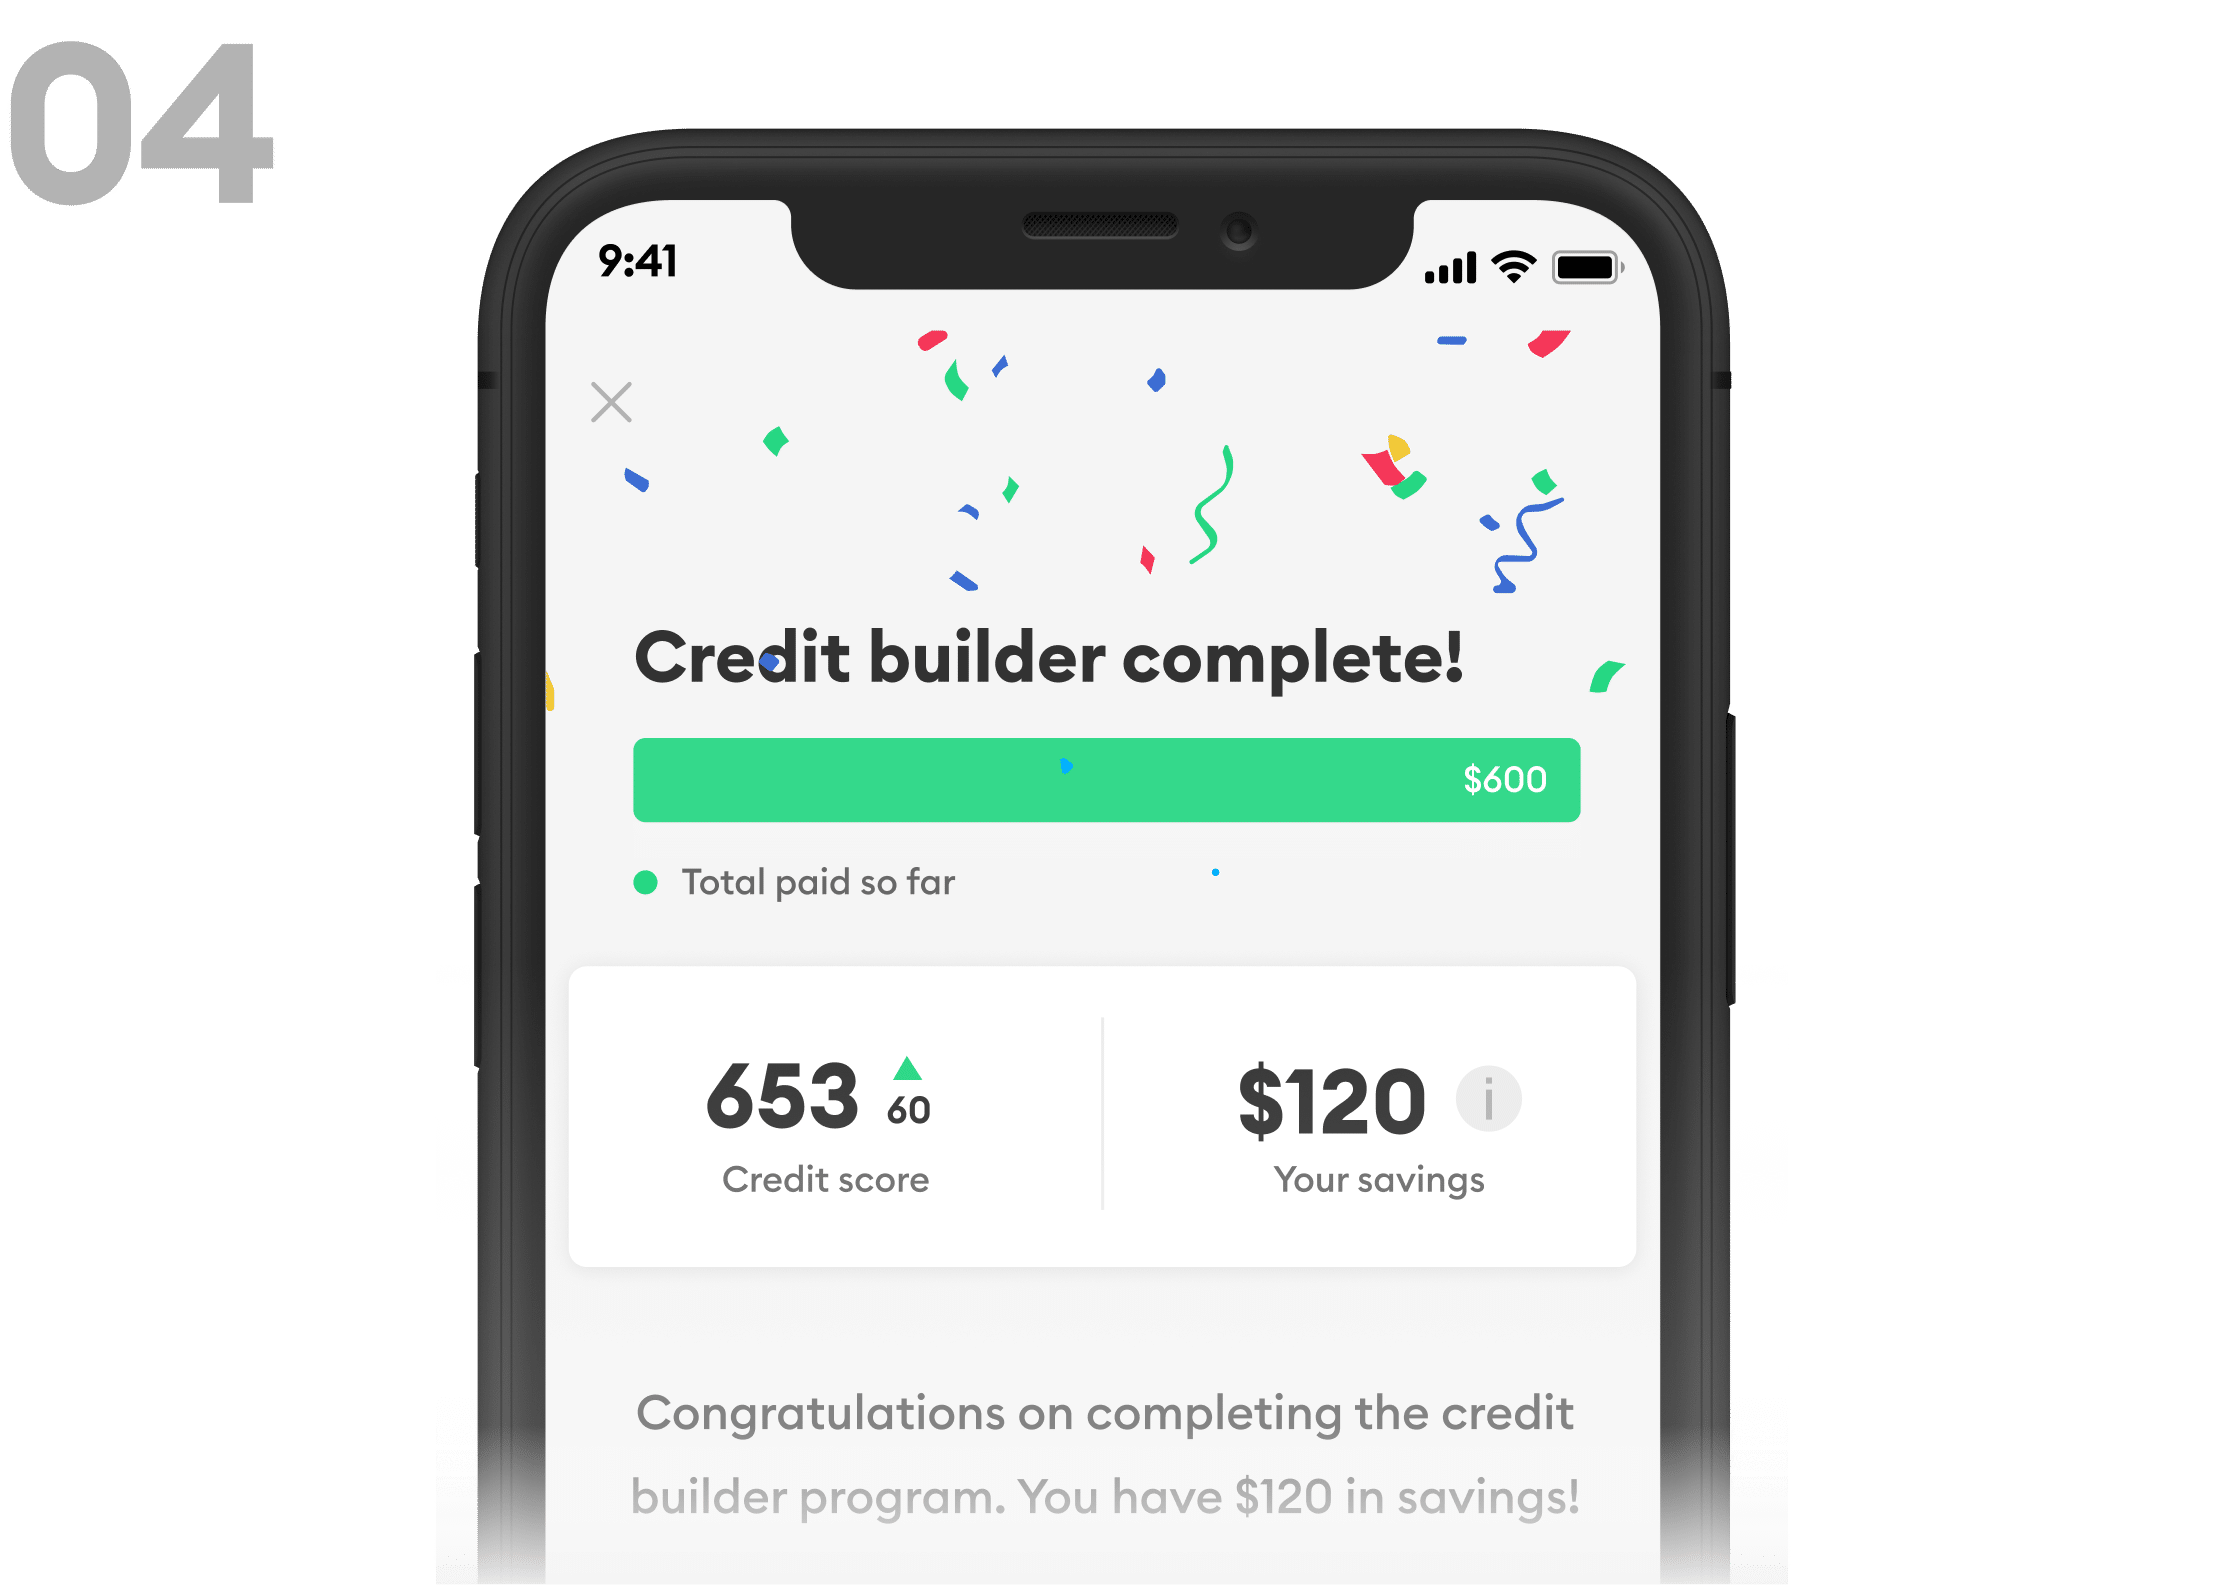 Image of phone showing Credit Builder tab and score of 653